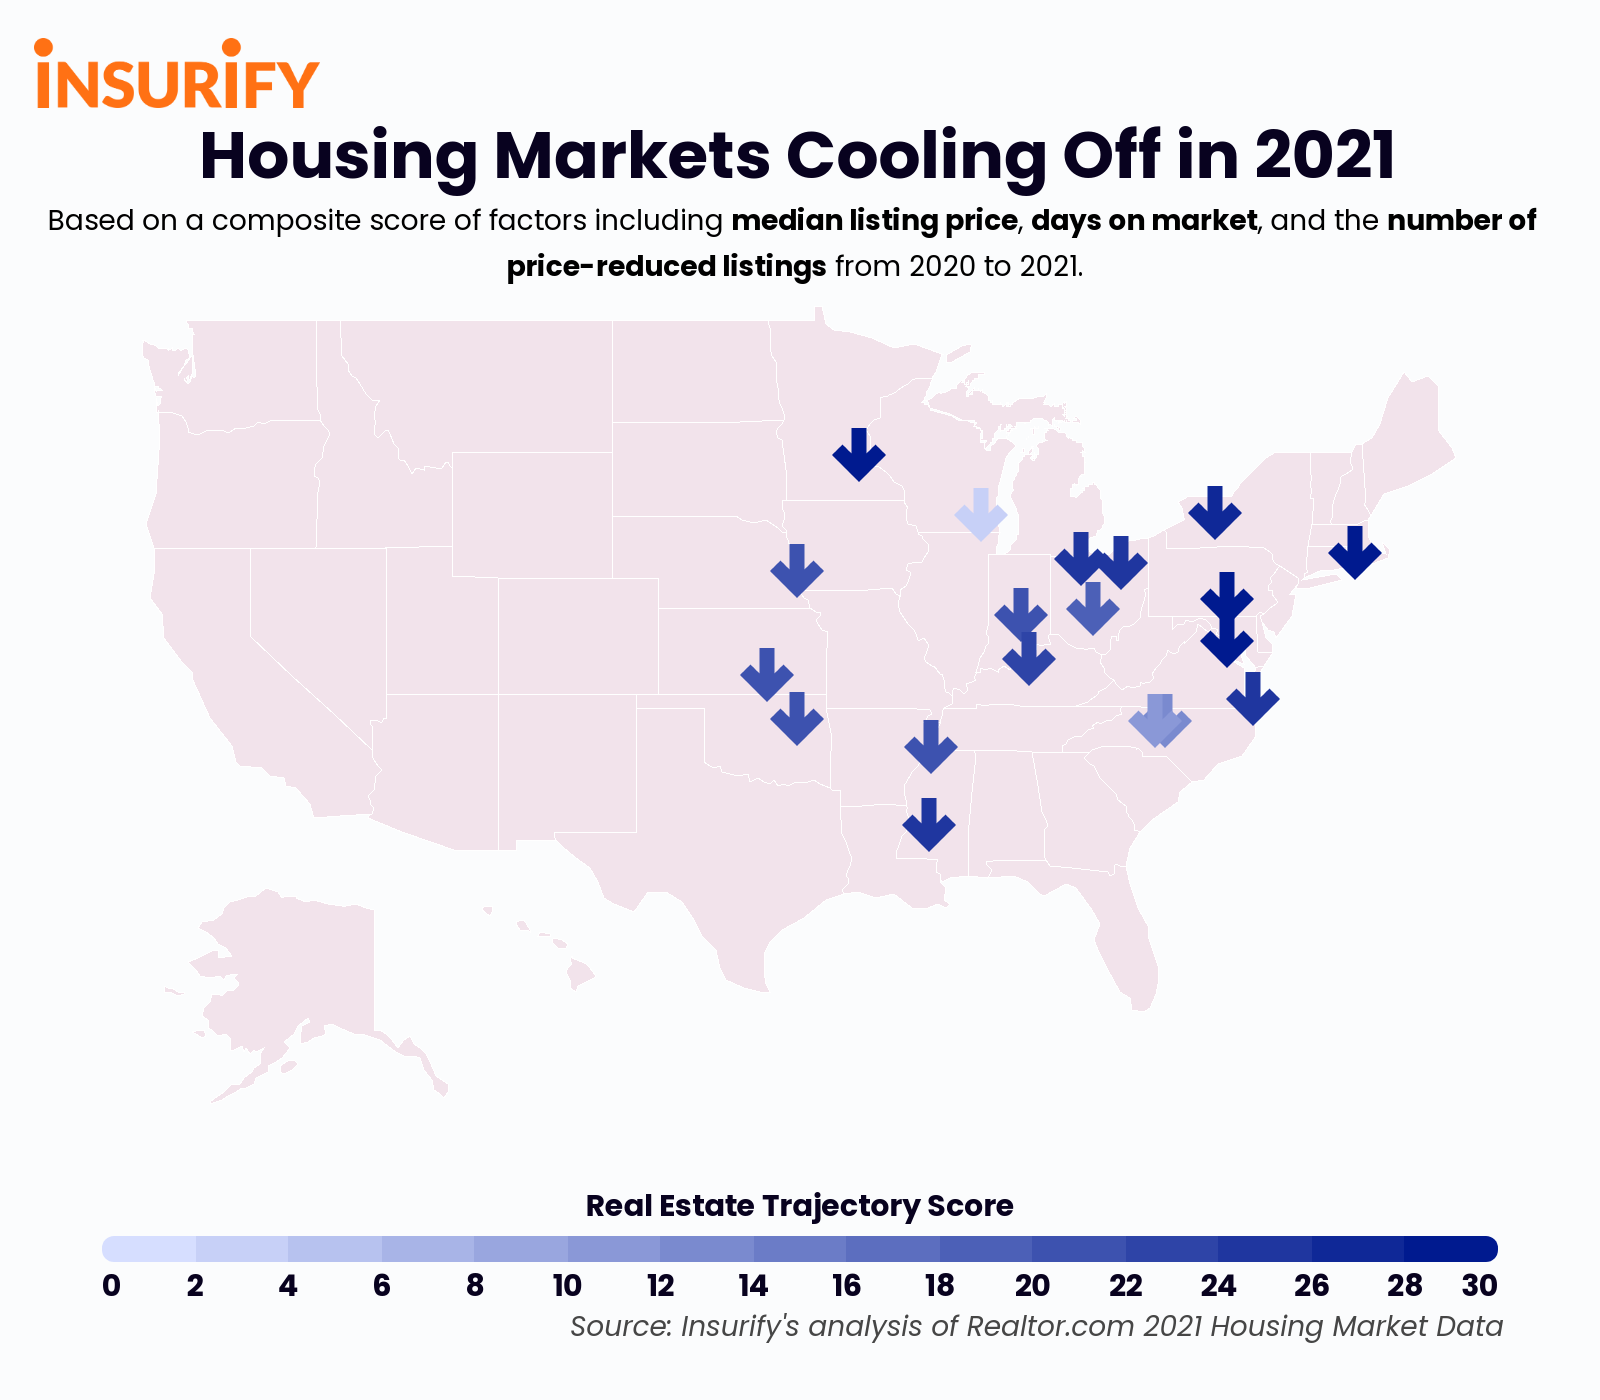 Is Competition in the Housing Market Cooling?